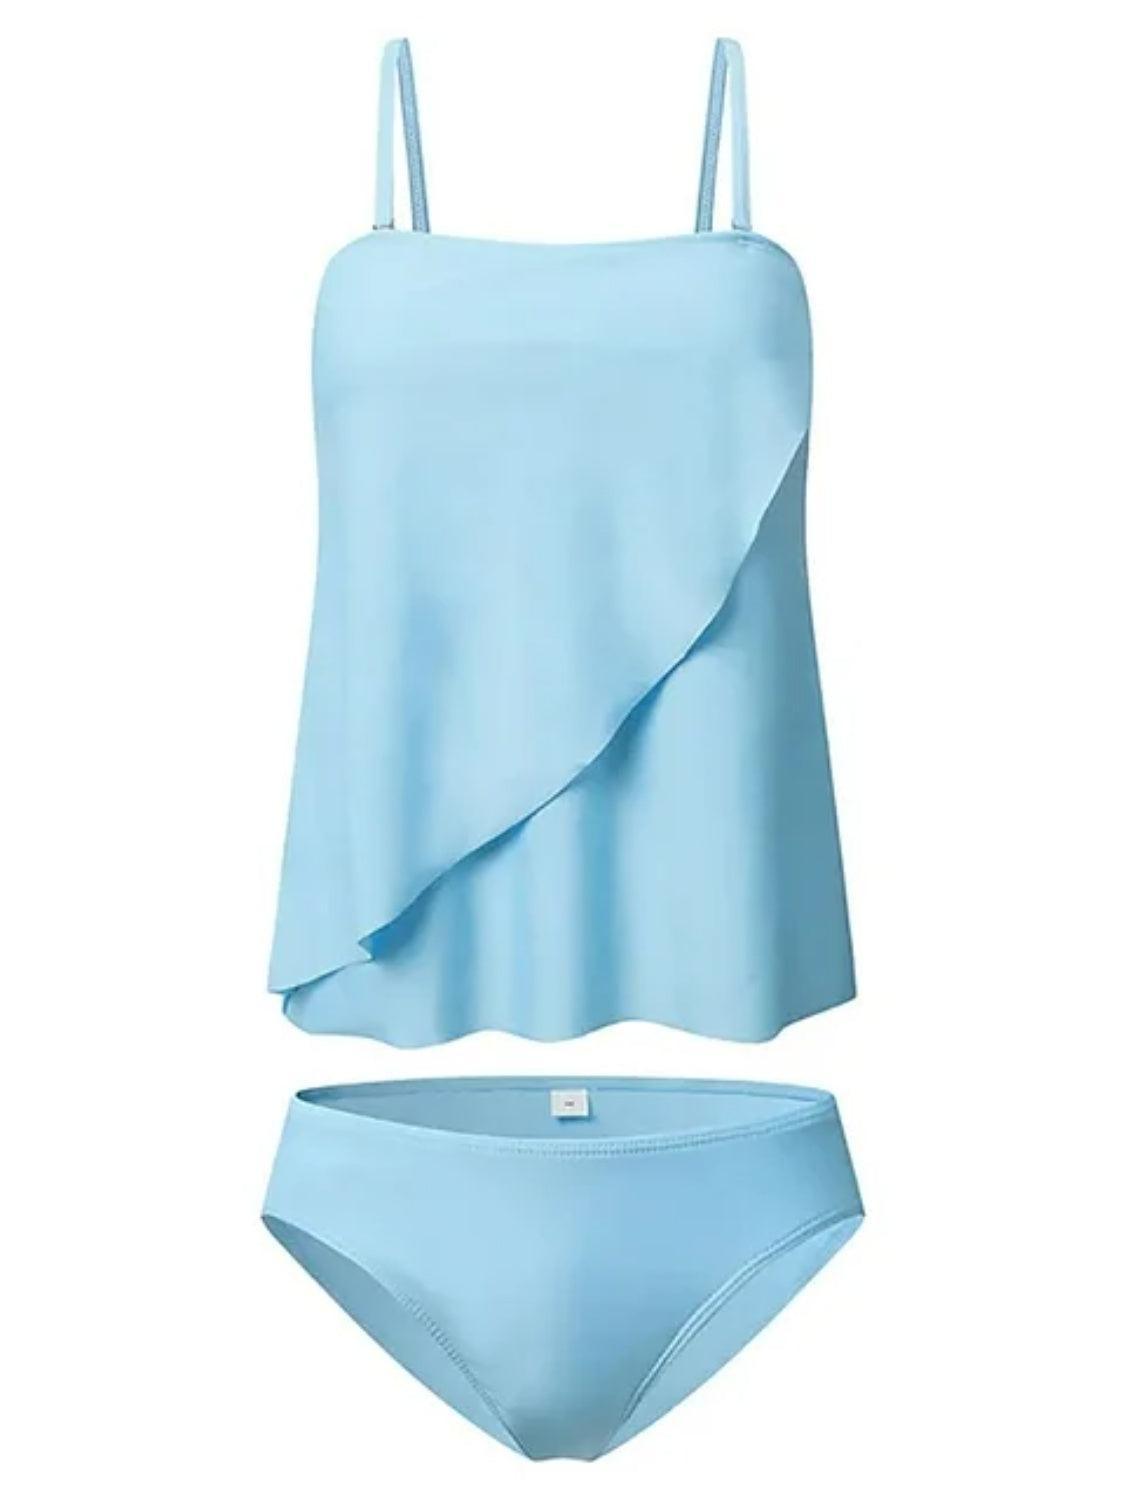 a women's blue swimsuit and panties